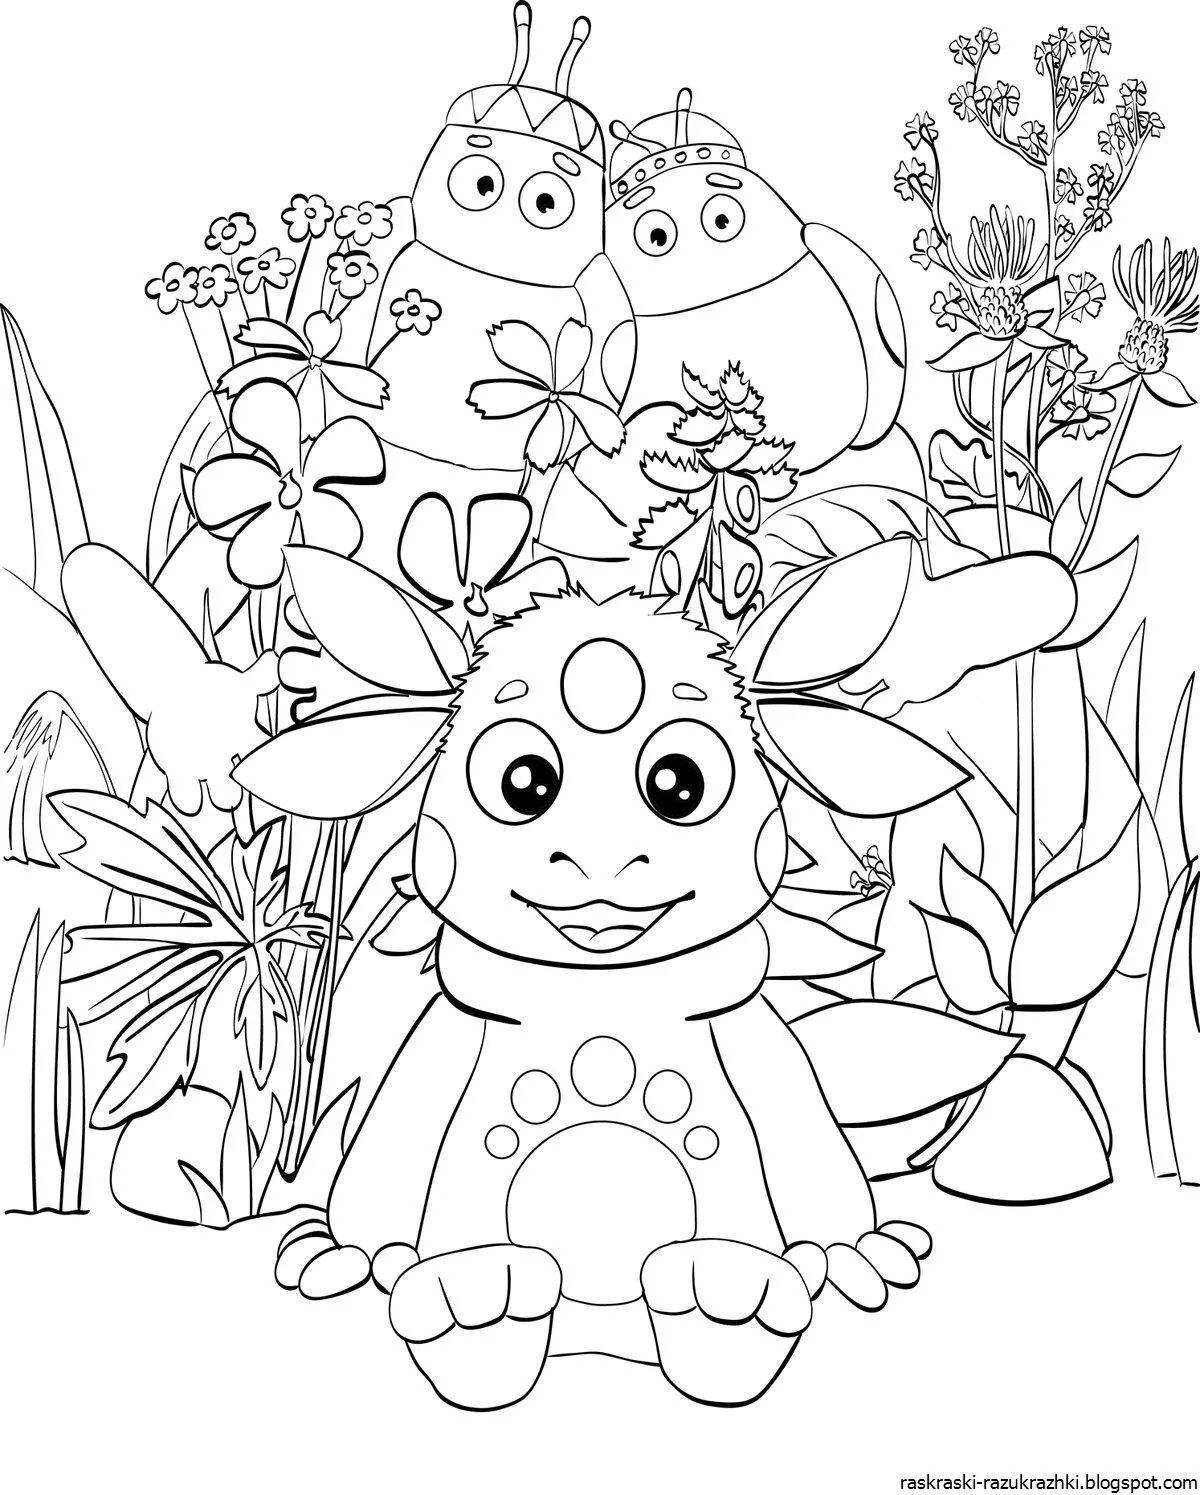 Fun coloring book for 3 year olds